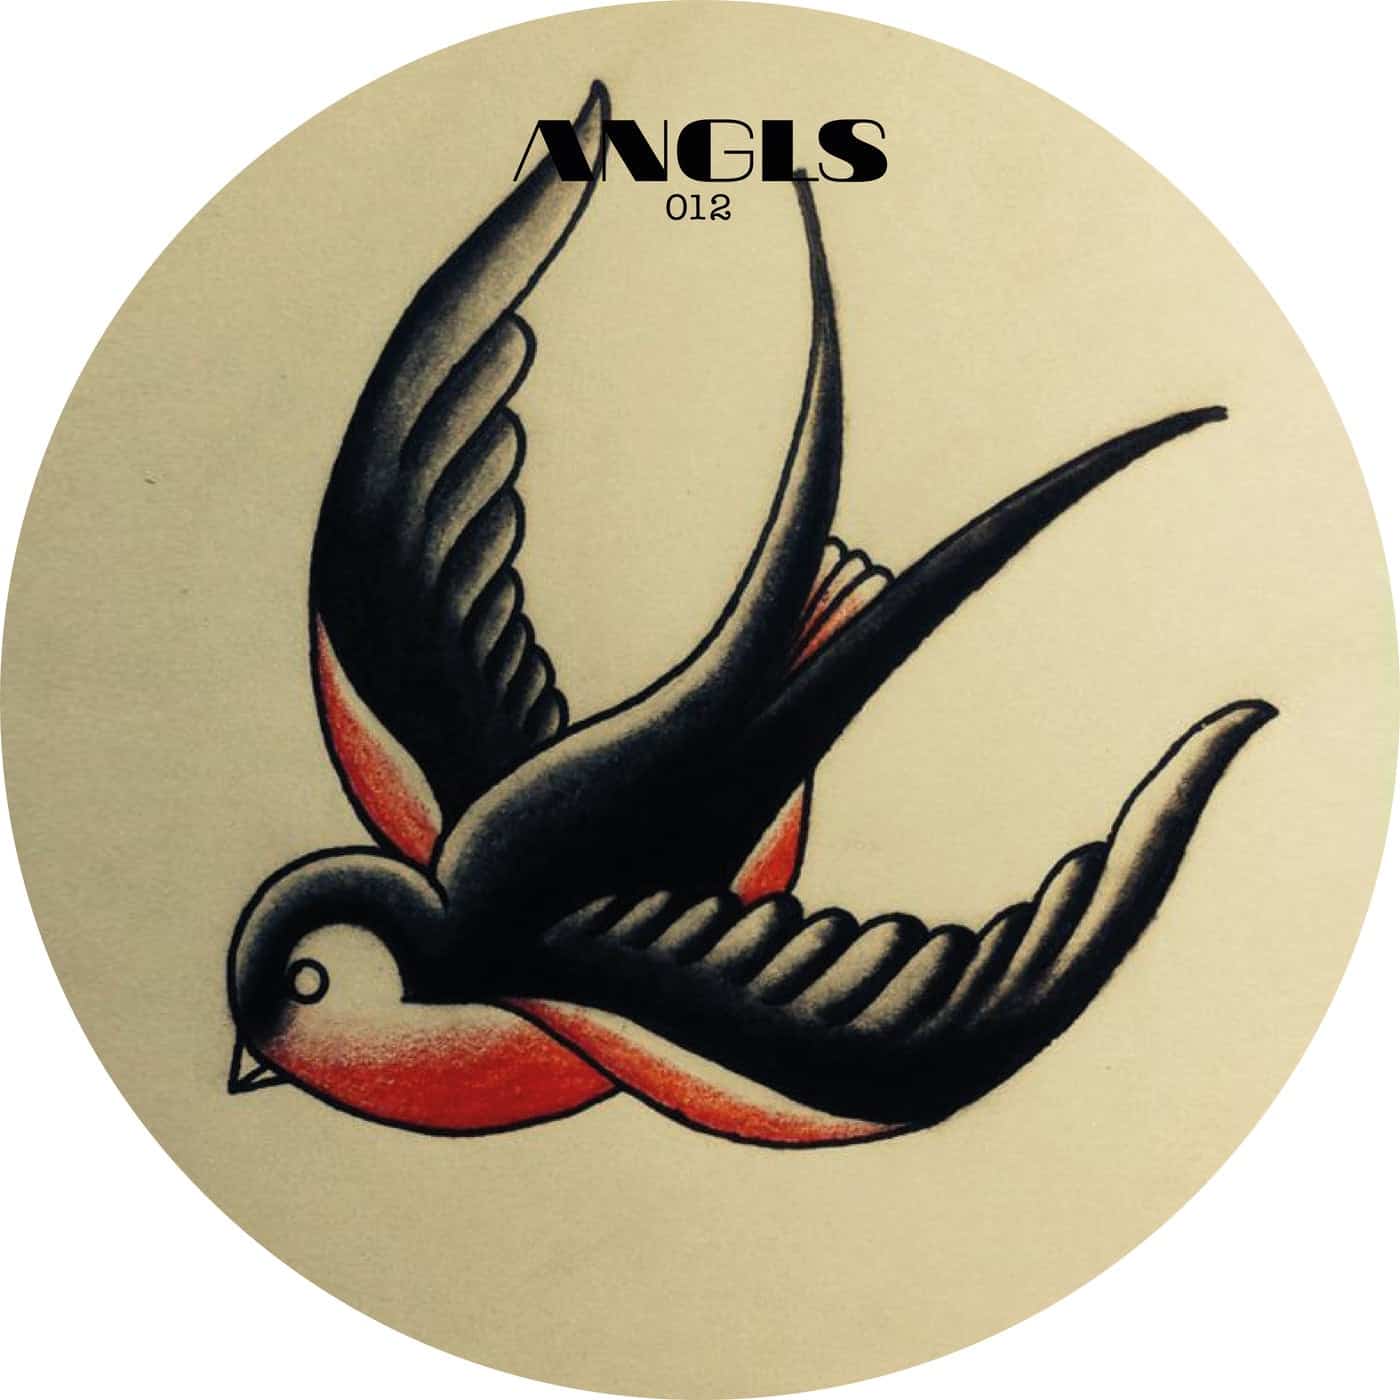 Download Dimi Angelis - ANGLS 012 on Electrobuzz